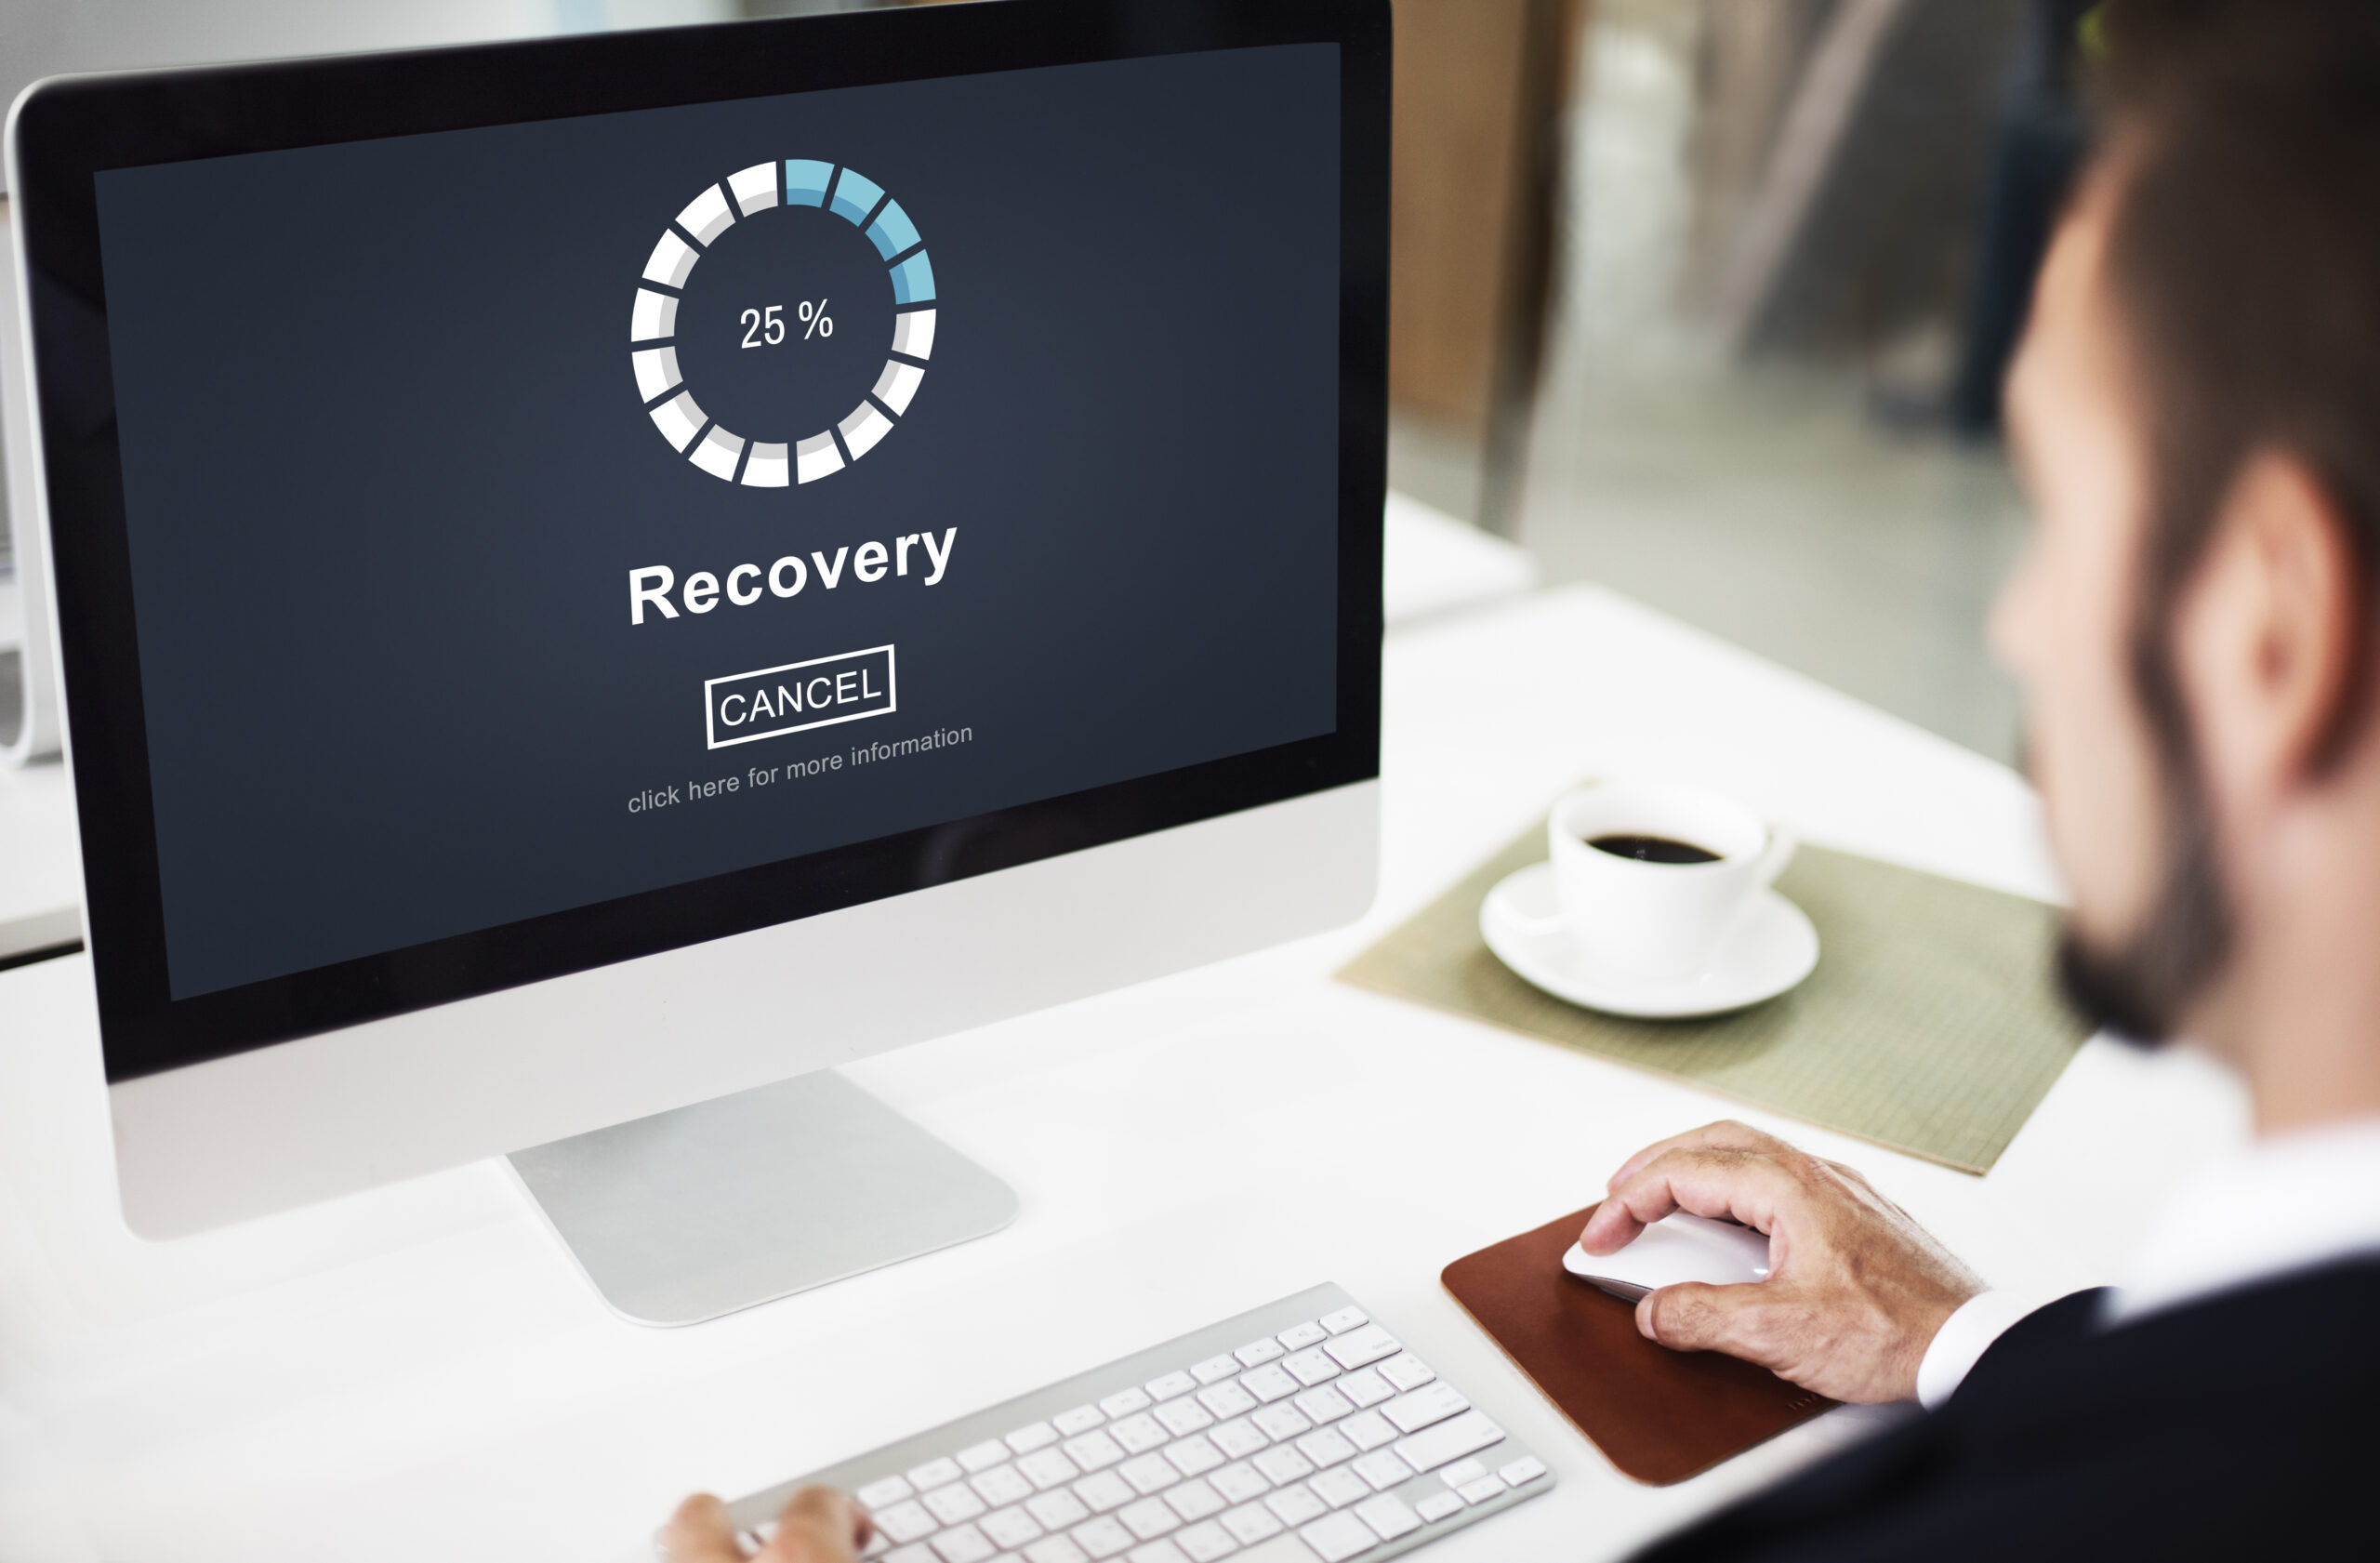 Are you protected with a disaster recovery plan?